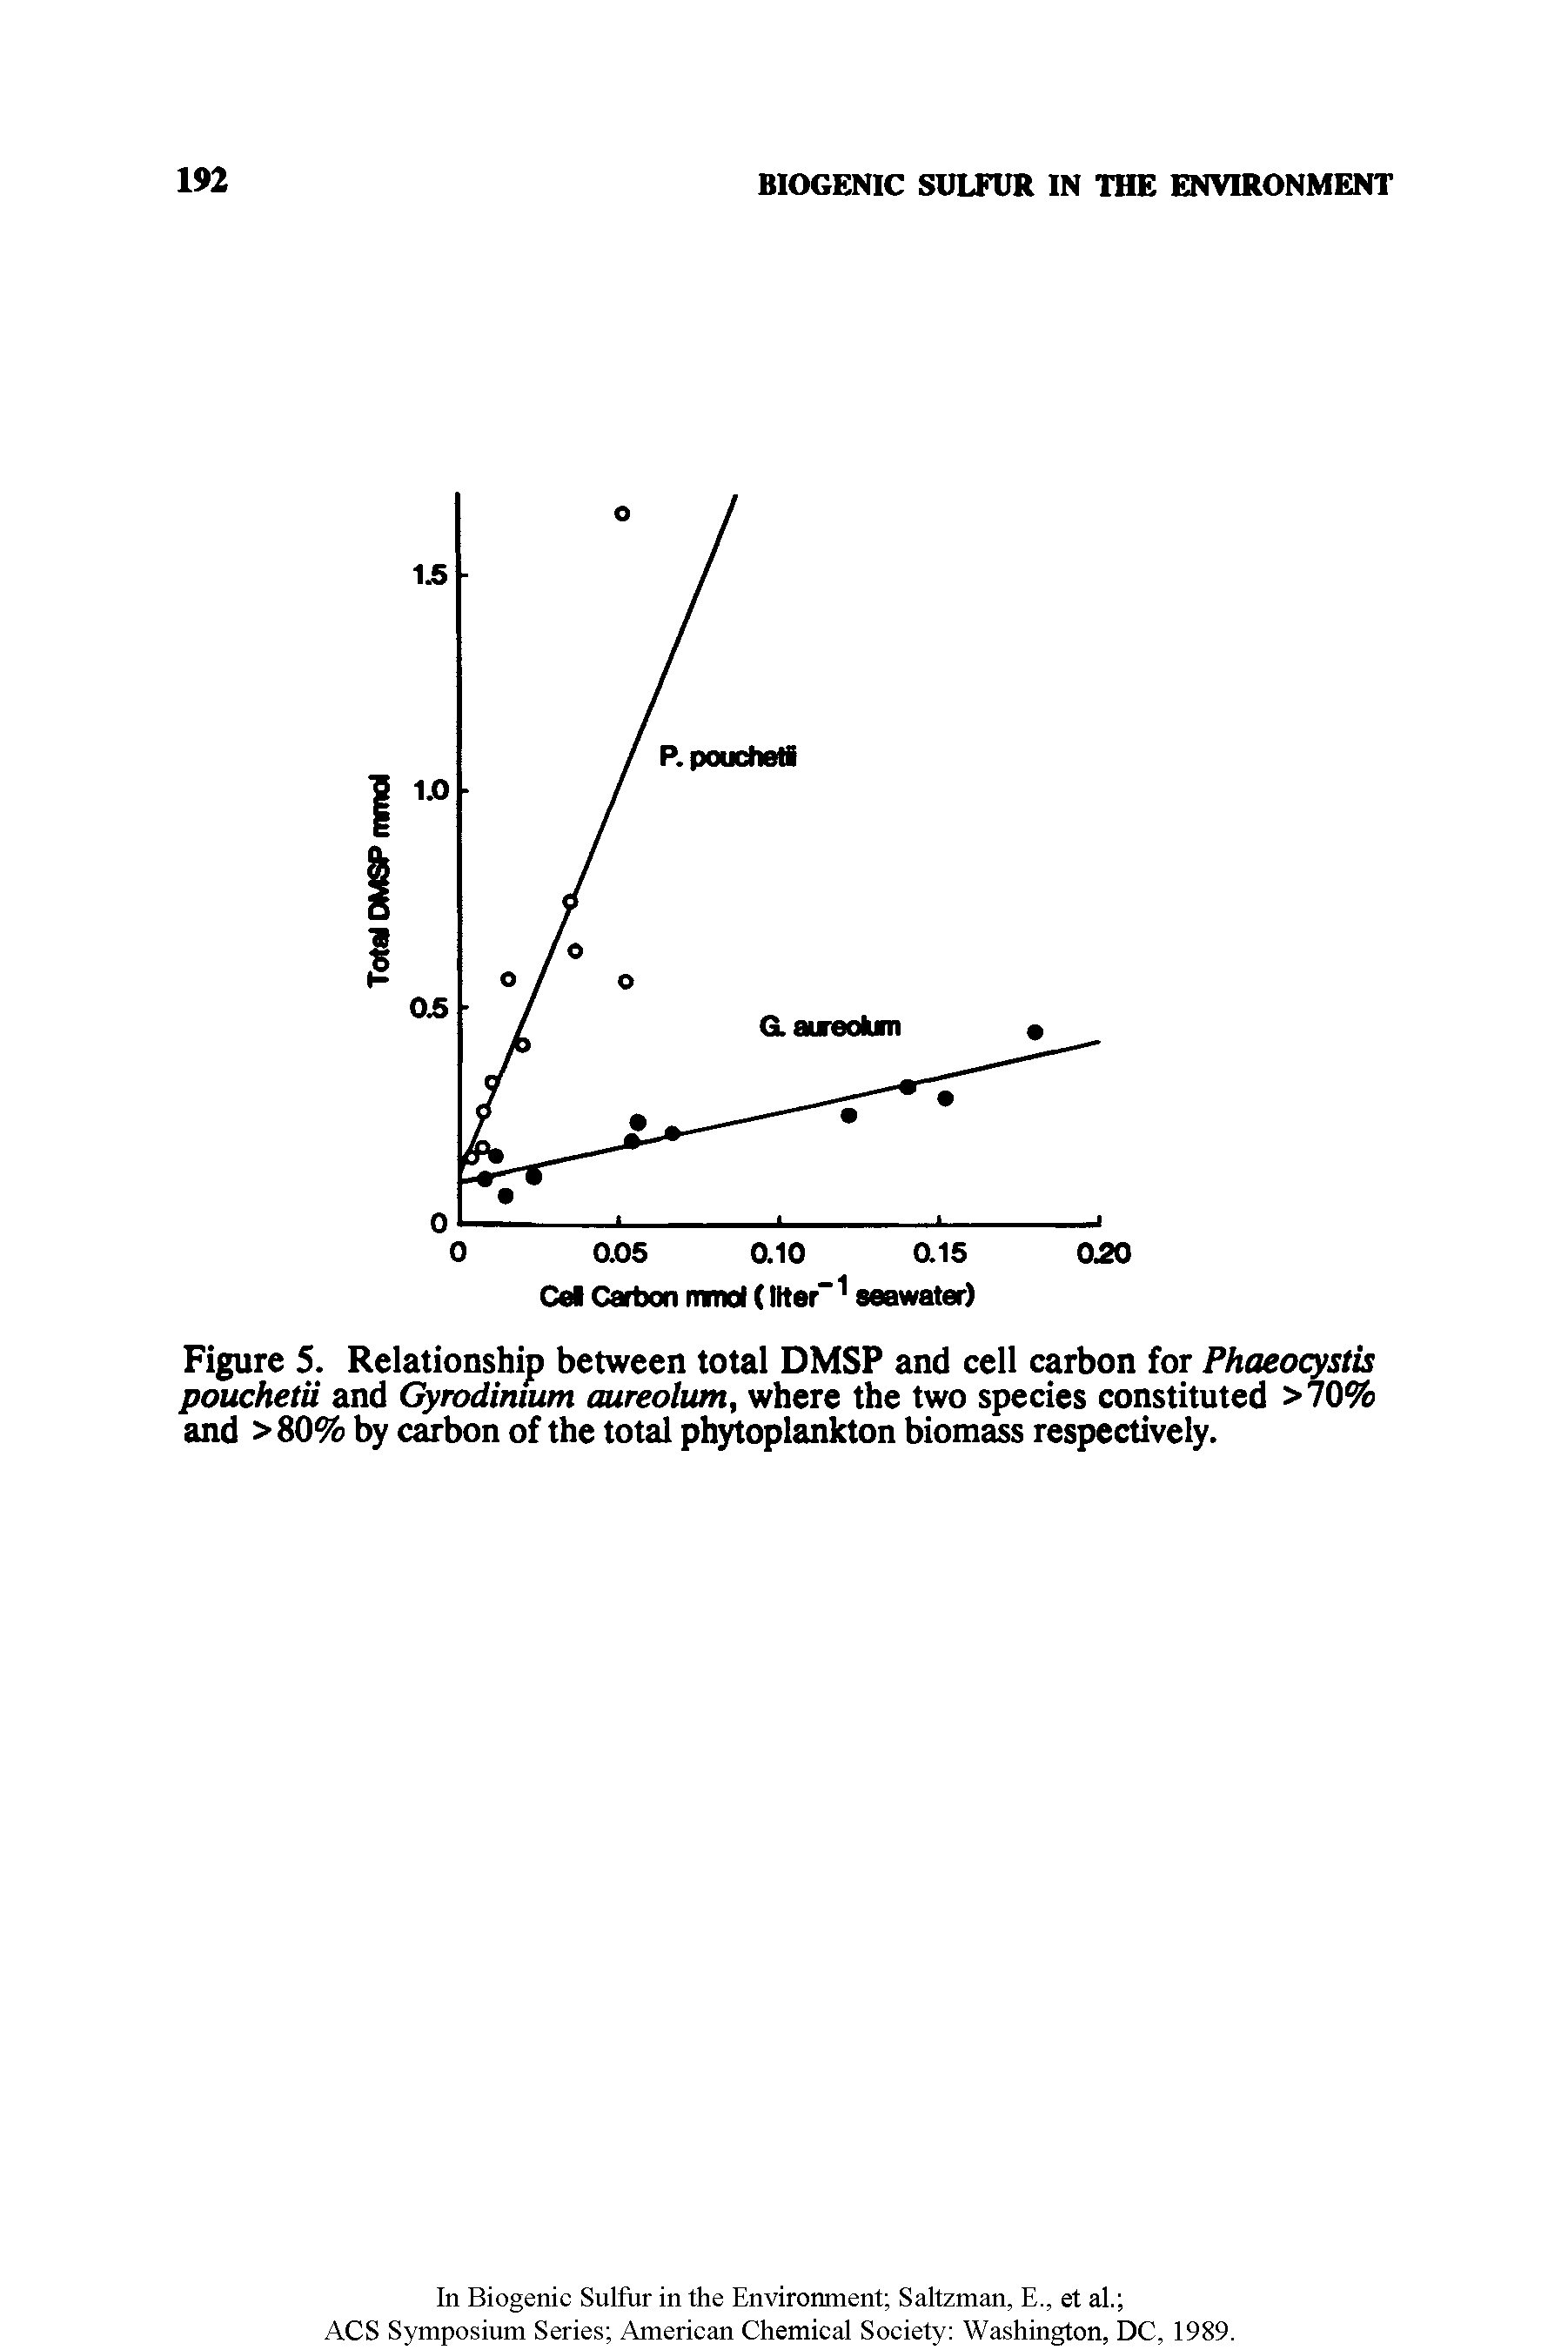 Figure 5. Relationship between total DMSP and cell carbon for Phaeocystis pouchetu and Gyrodinium aureolum, where the two species constituted >70% and >80% by carbon of the total phytoplankton biomass respectively.